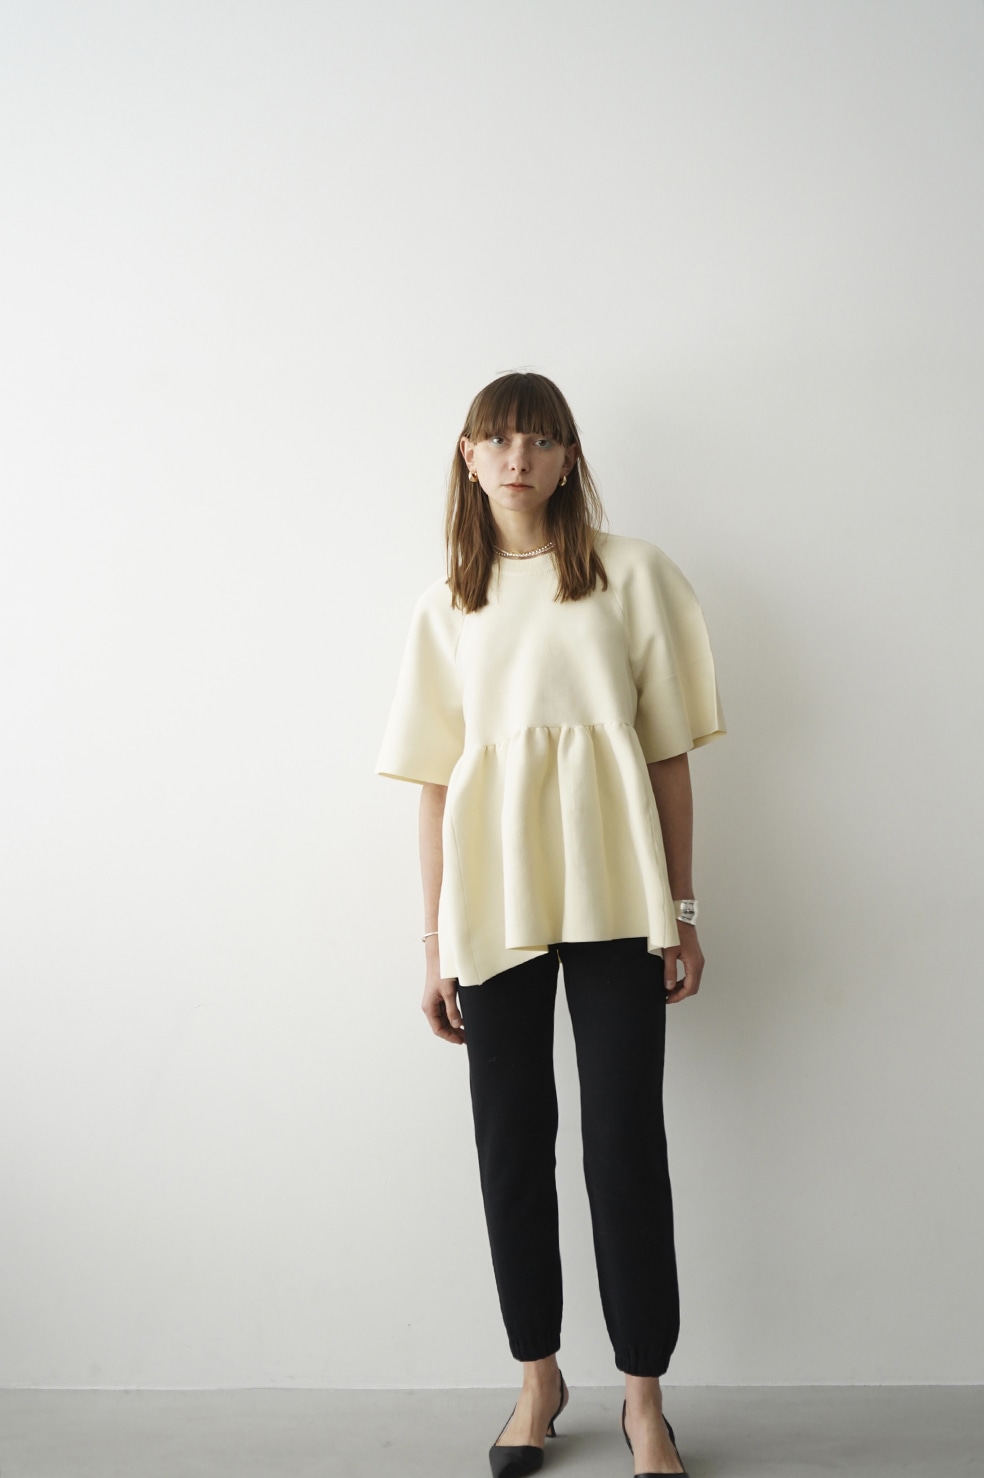 BALLOON GATHER KNIT TOPS｜TOPS(トップス)｜CLANE OFFICIAL ONLINE STORE